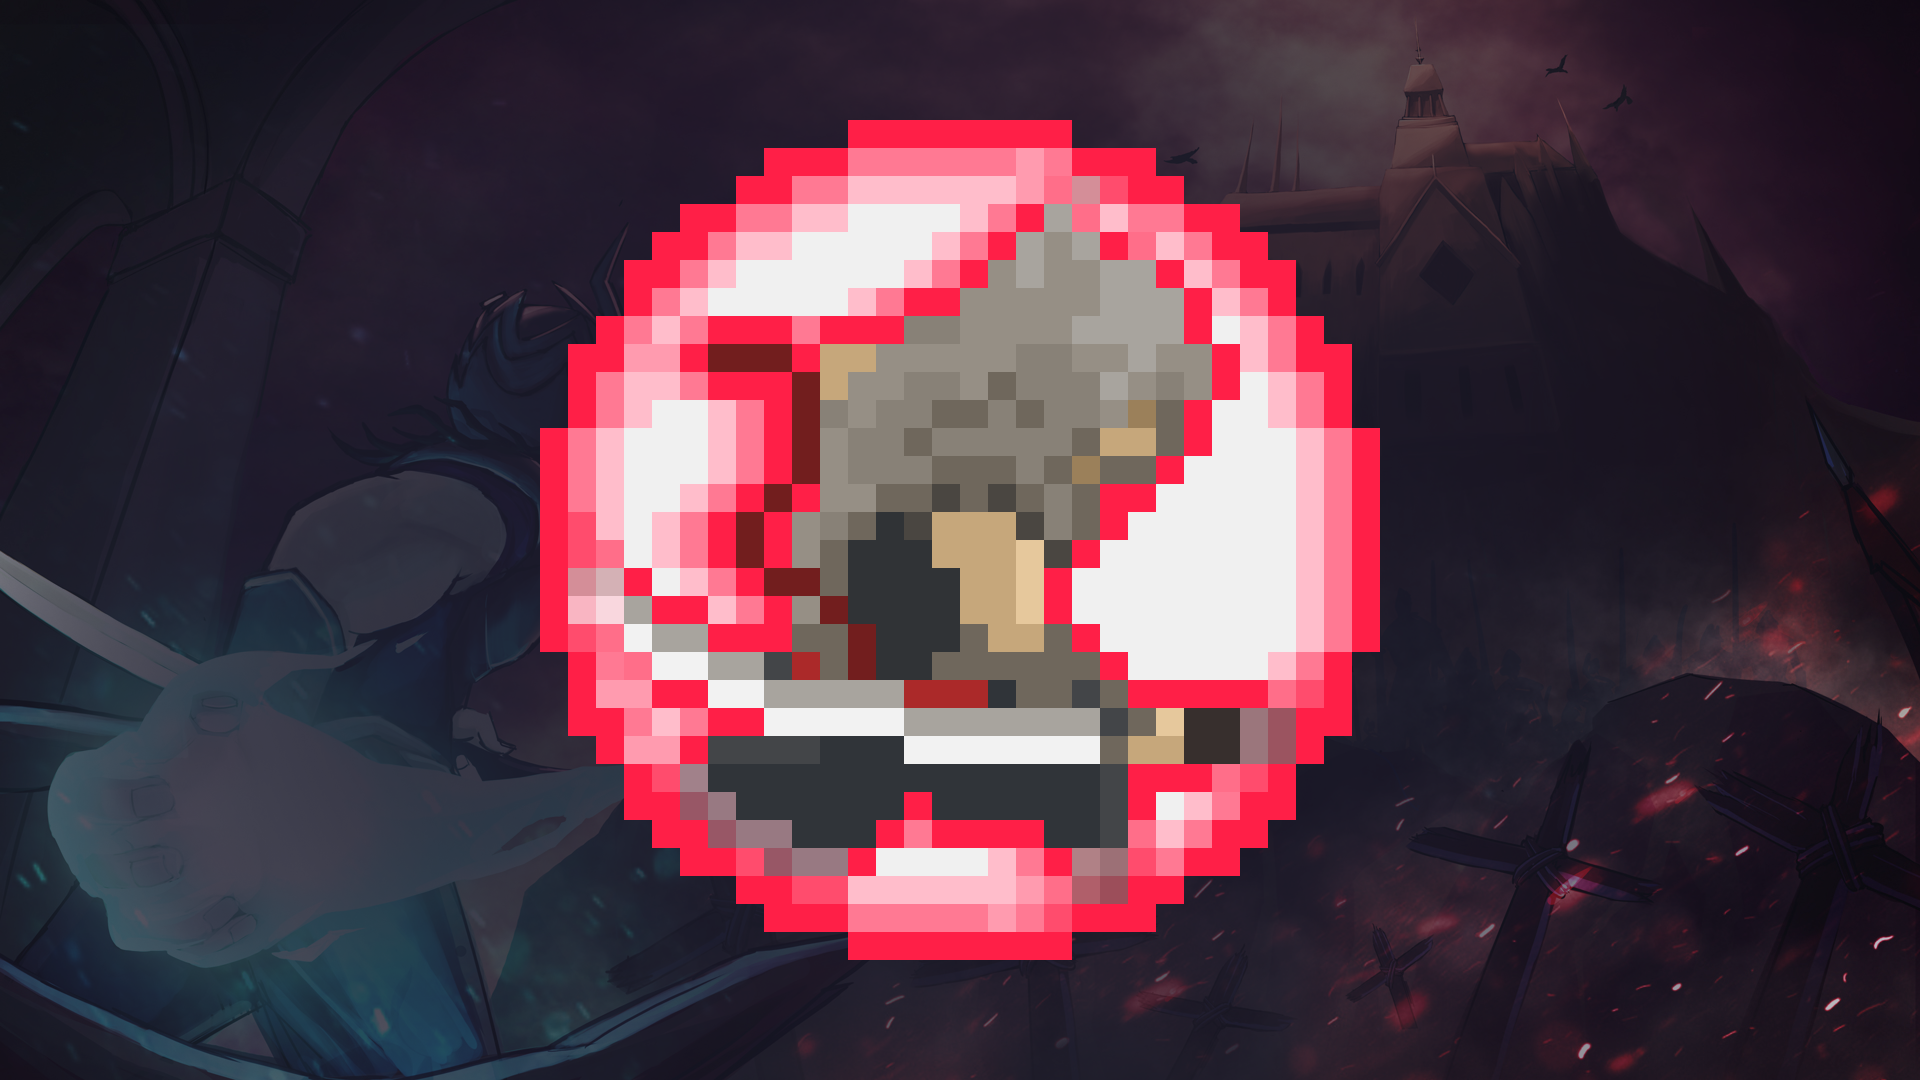 Icon for Counter Master